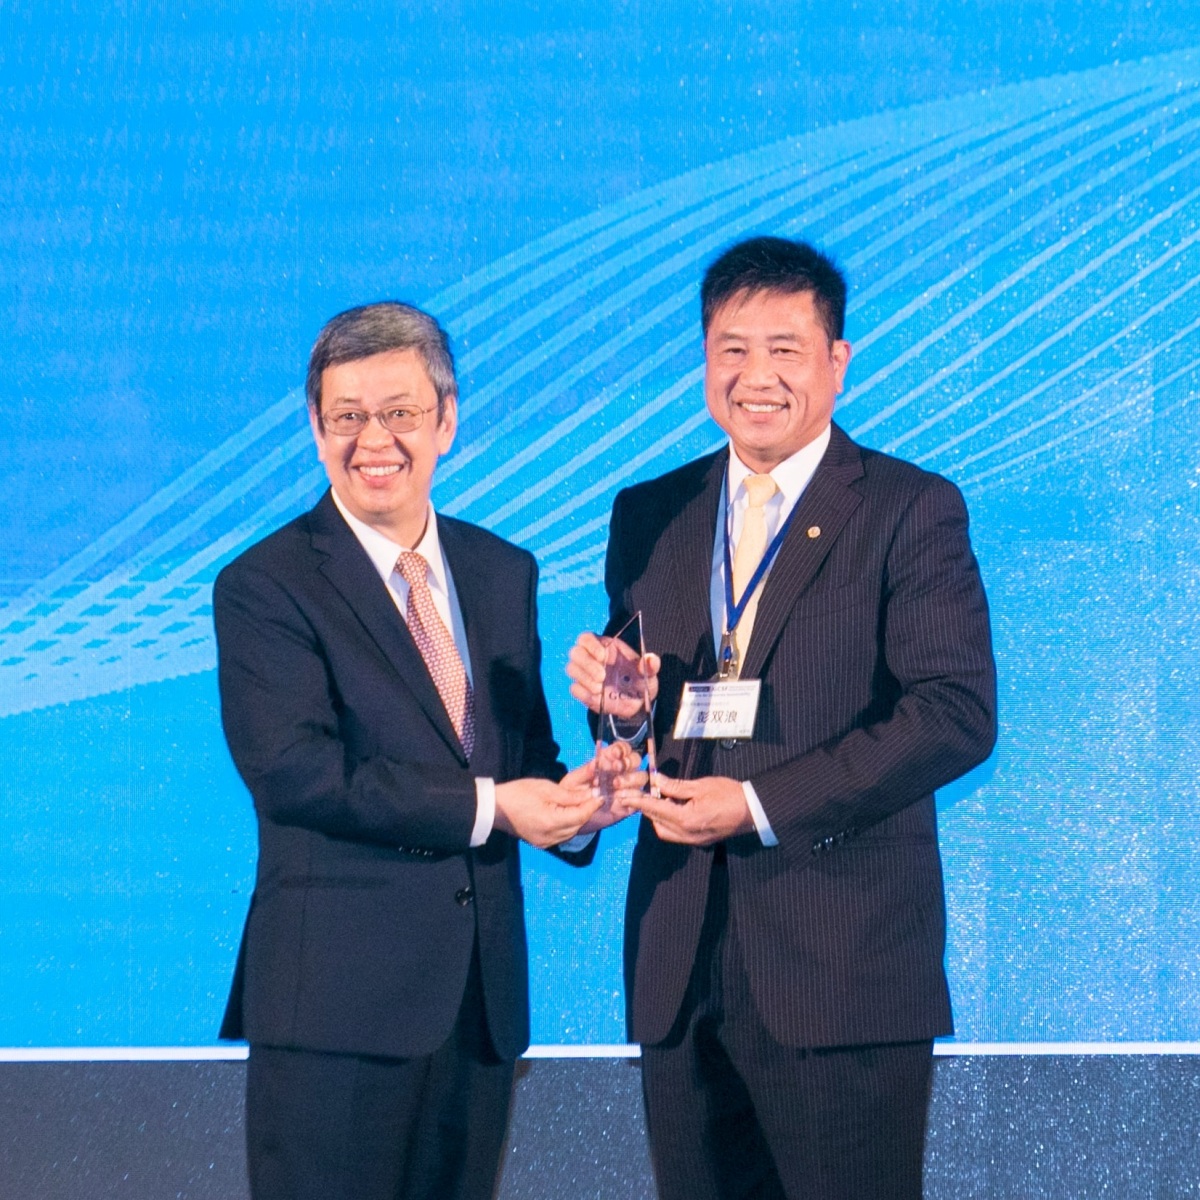 AUO's All-round Sustainability Performance Honored with Ten 2018 Taiwan Corporate Sustainability Awards